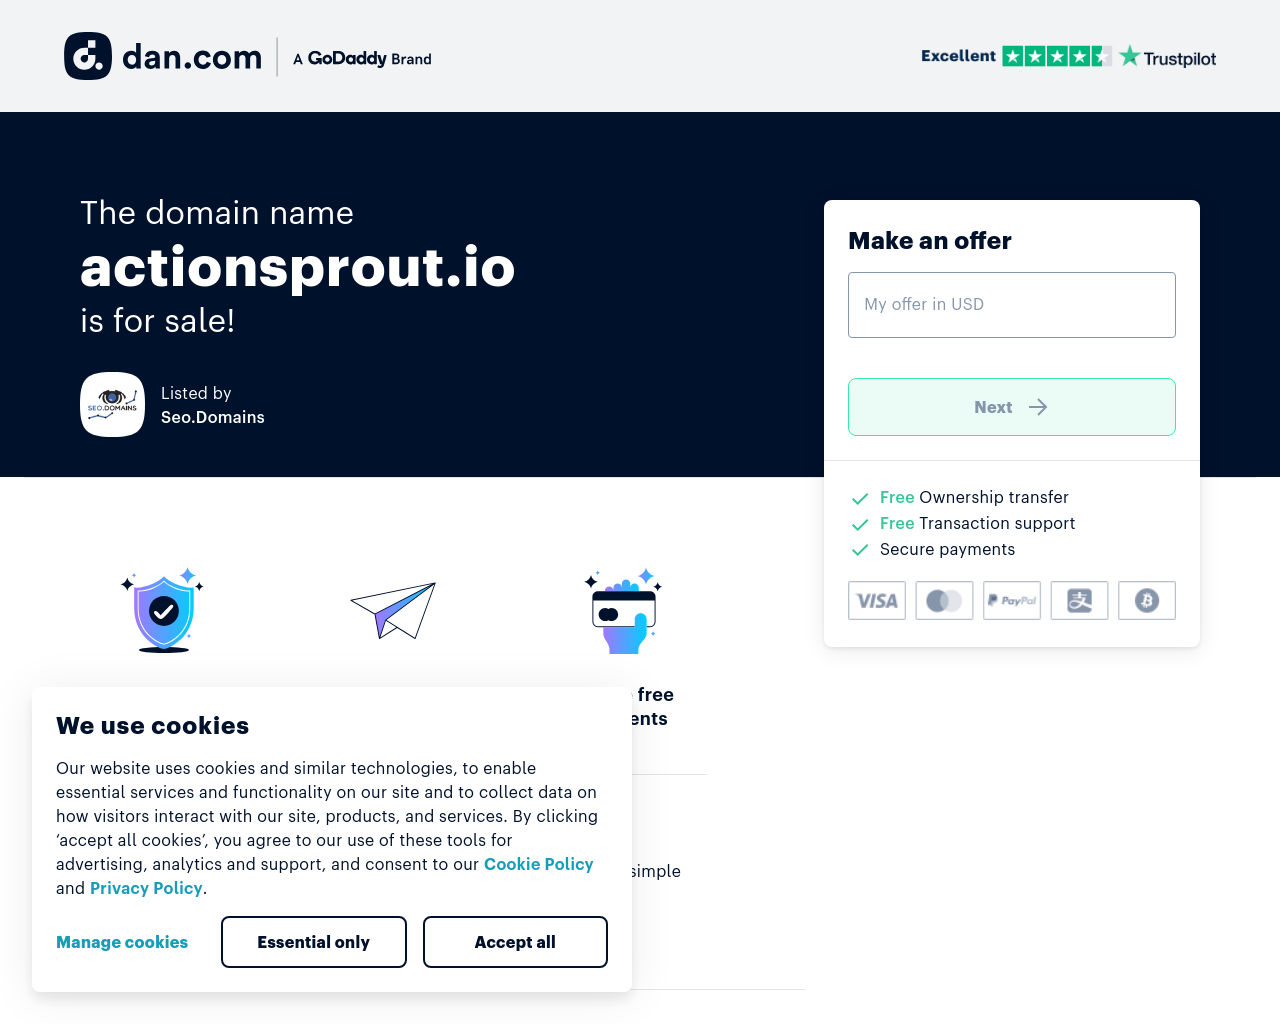 actionsprout.io